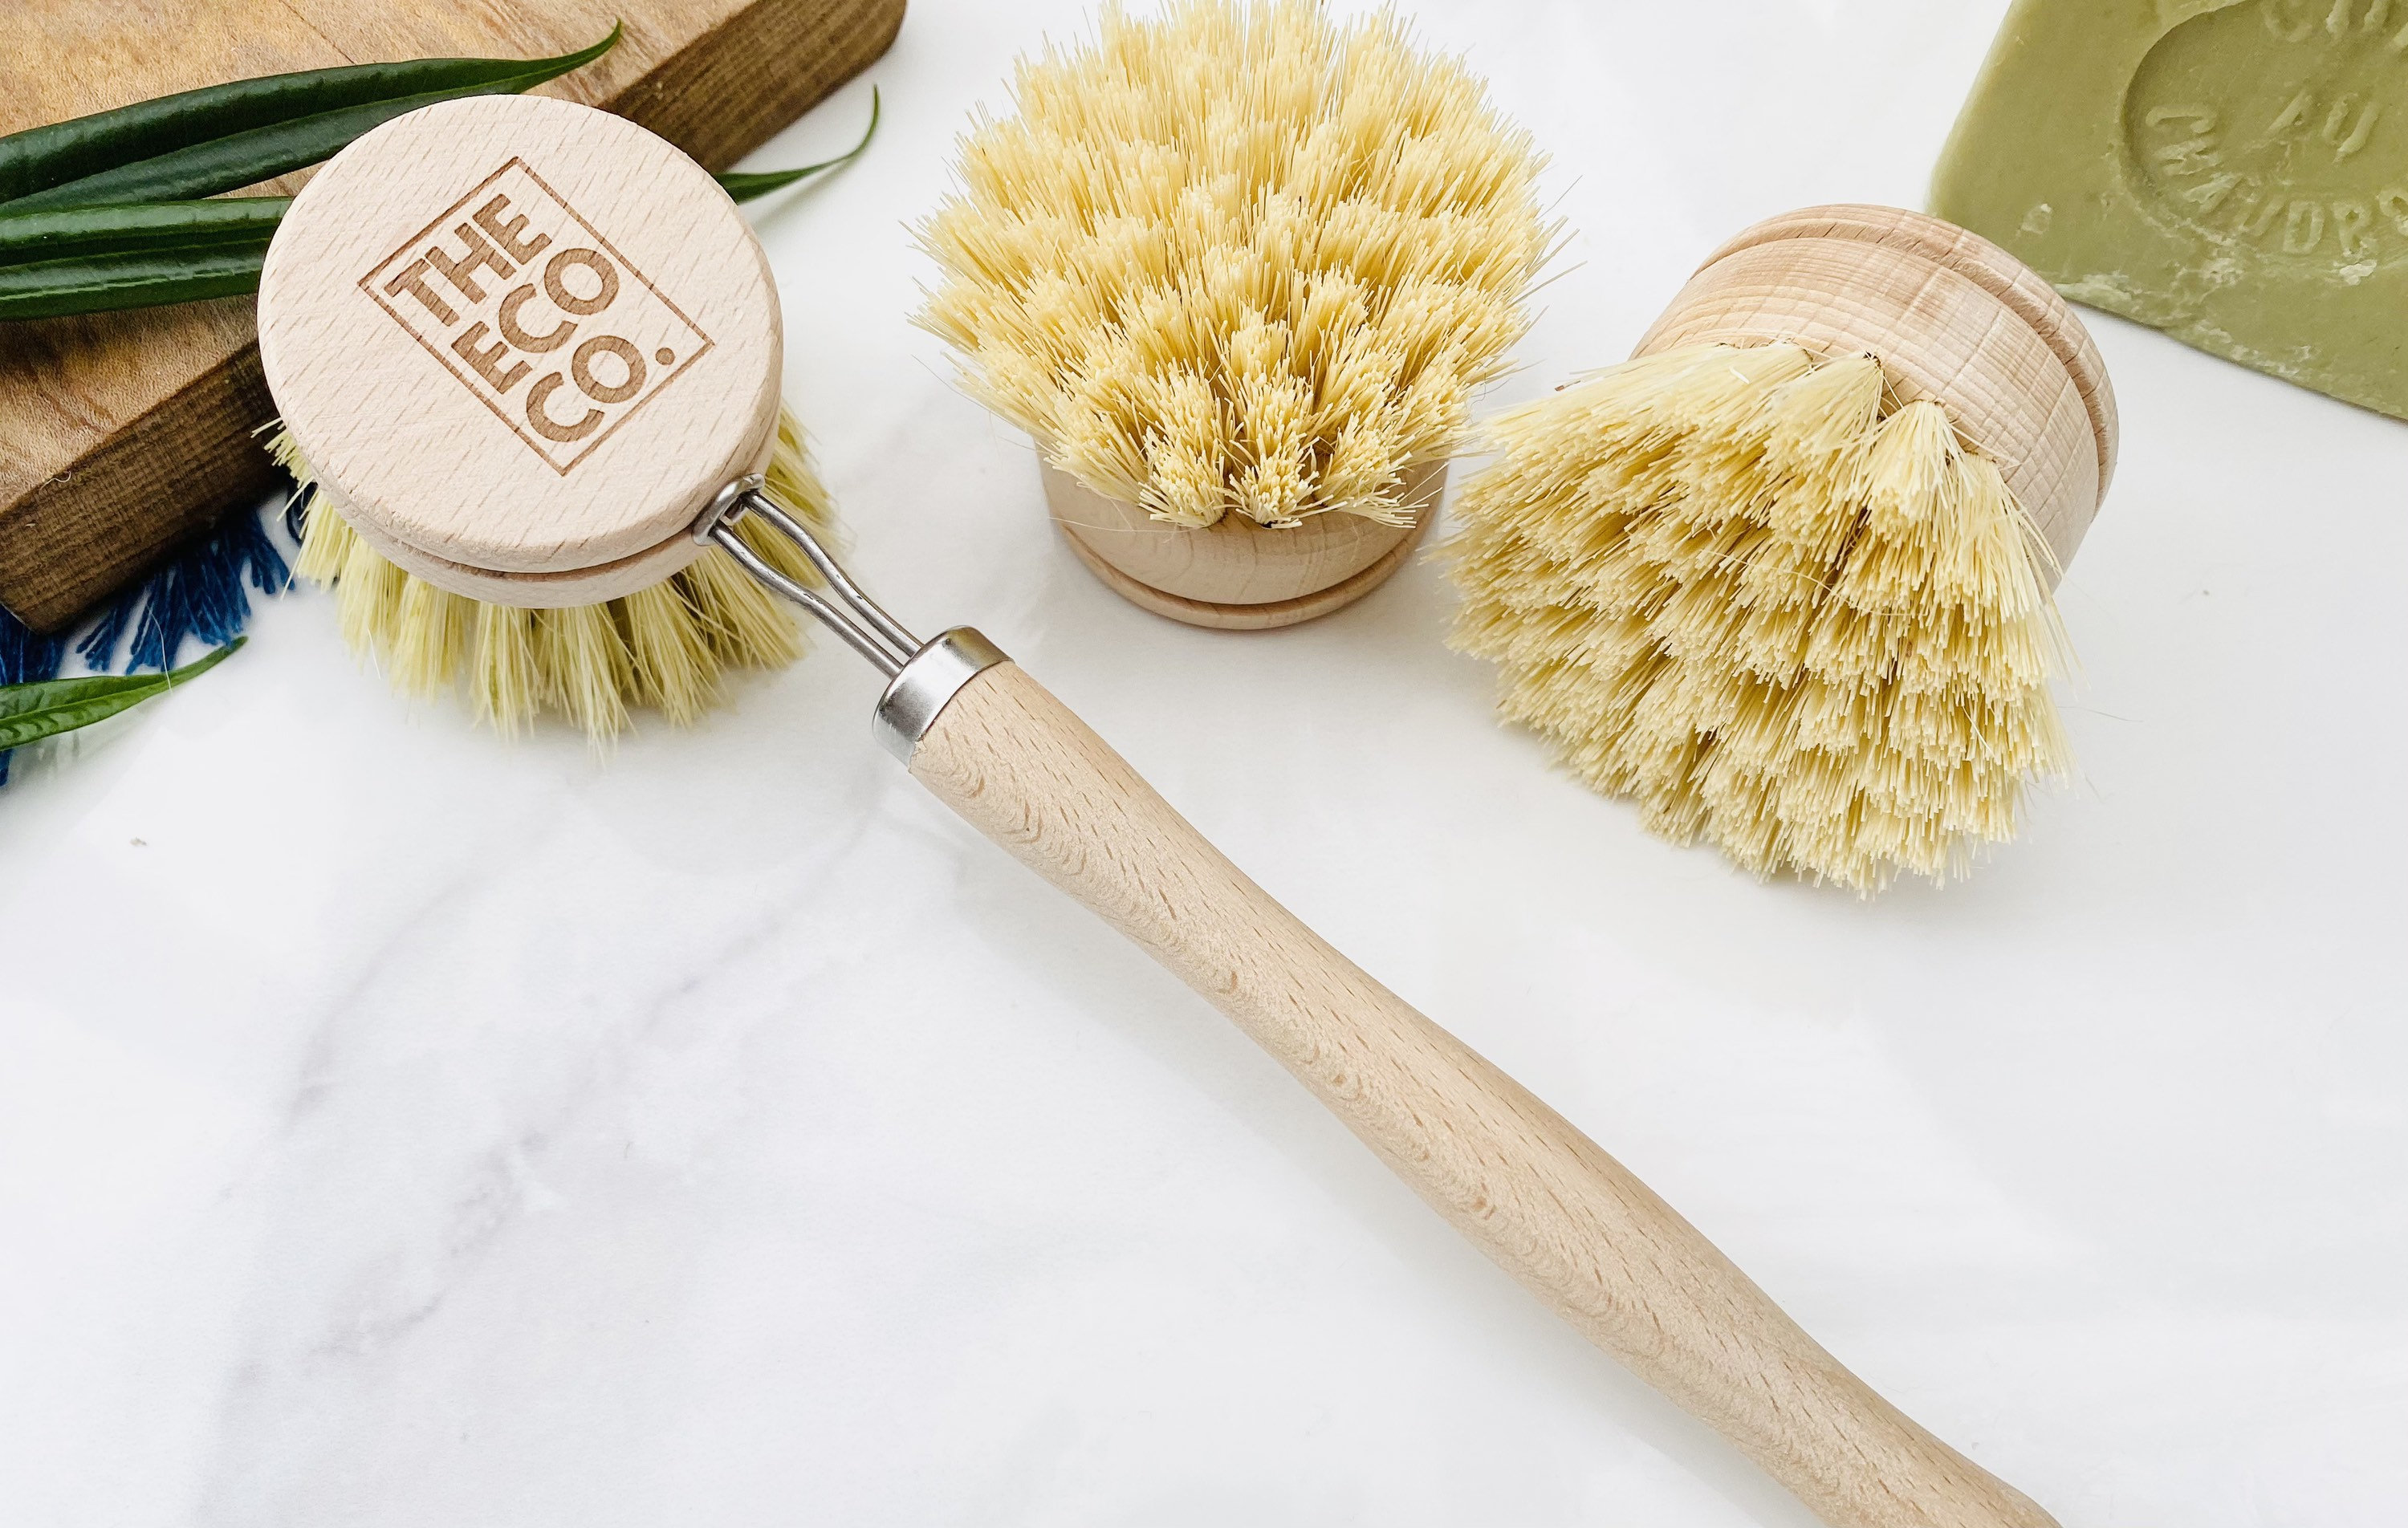 Biplut Cleaning Brush Round Head Soft Bristle Pure Wood Ergonomic Handle  Dish Scrubbing Brush for Home (Wooden Color) 